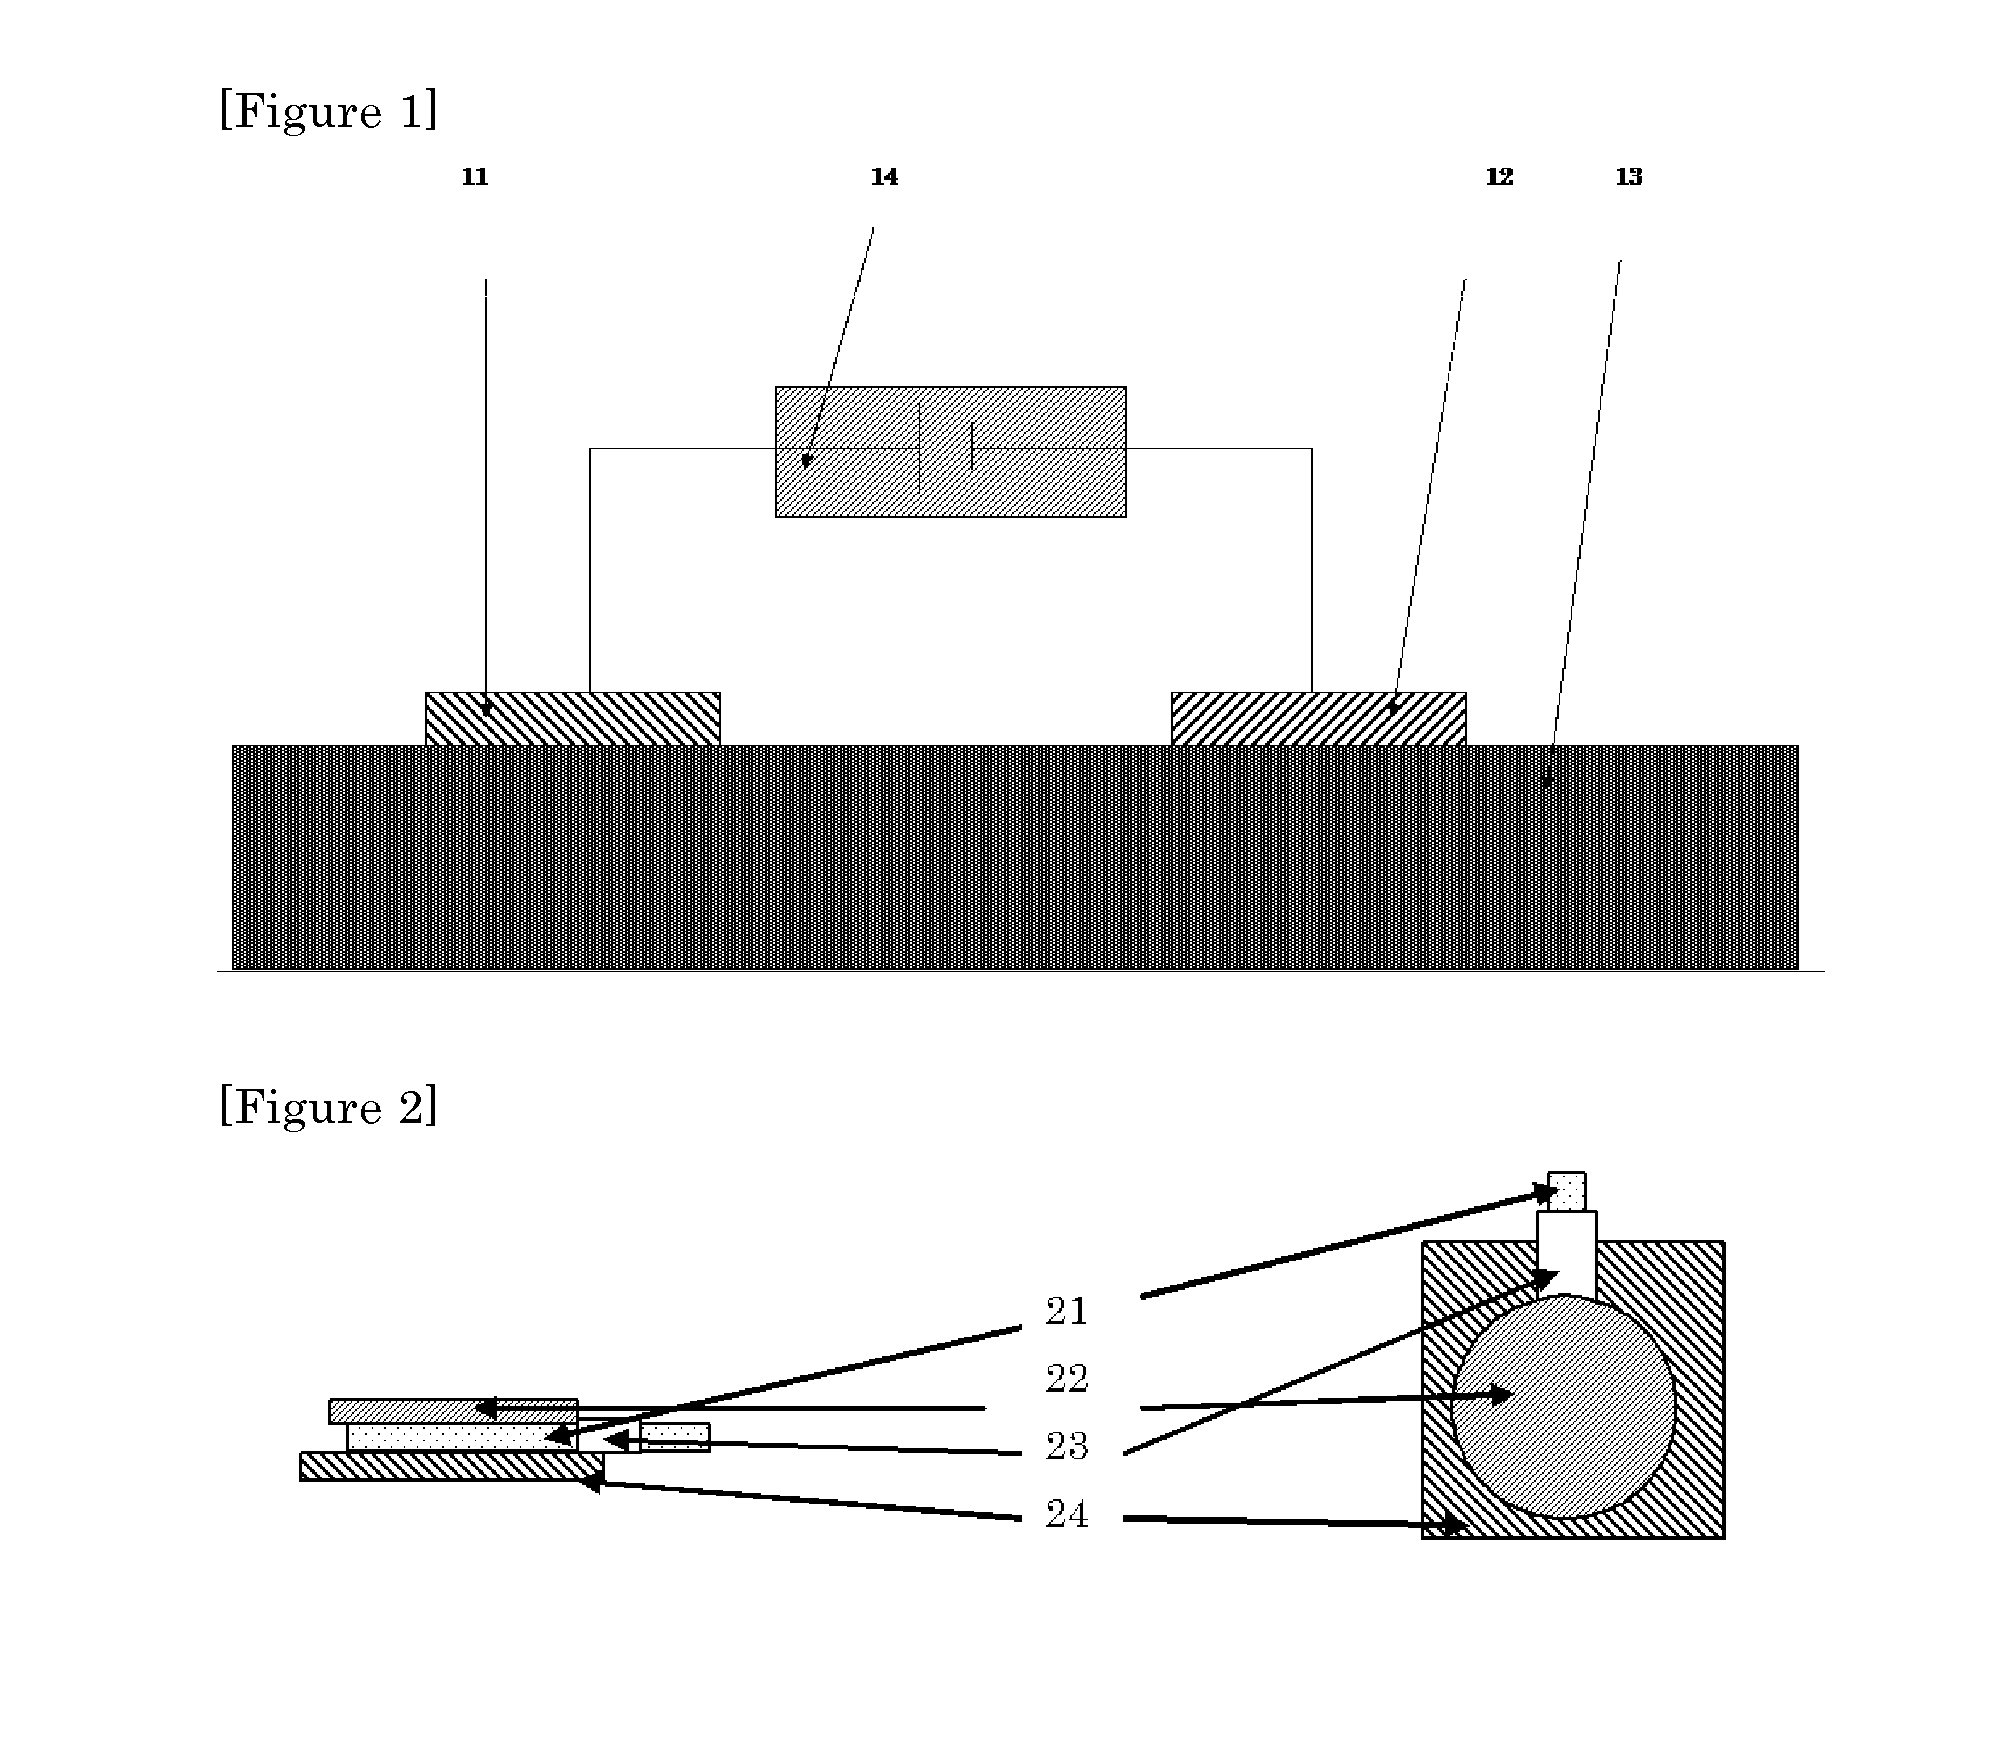 Drug product, a method of administrating a vaccine using the drug product, and an apparatus for iontophoresis